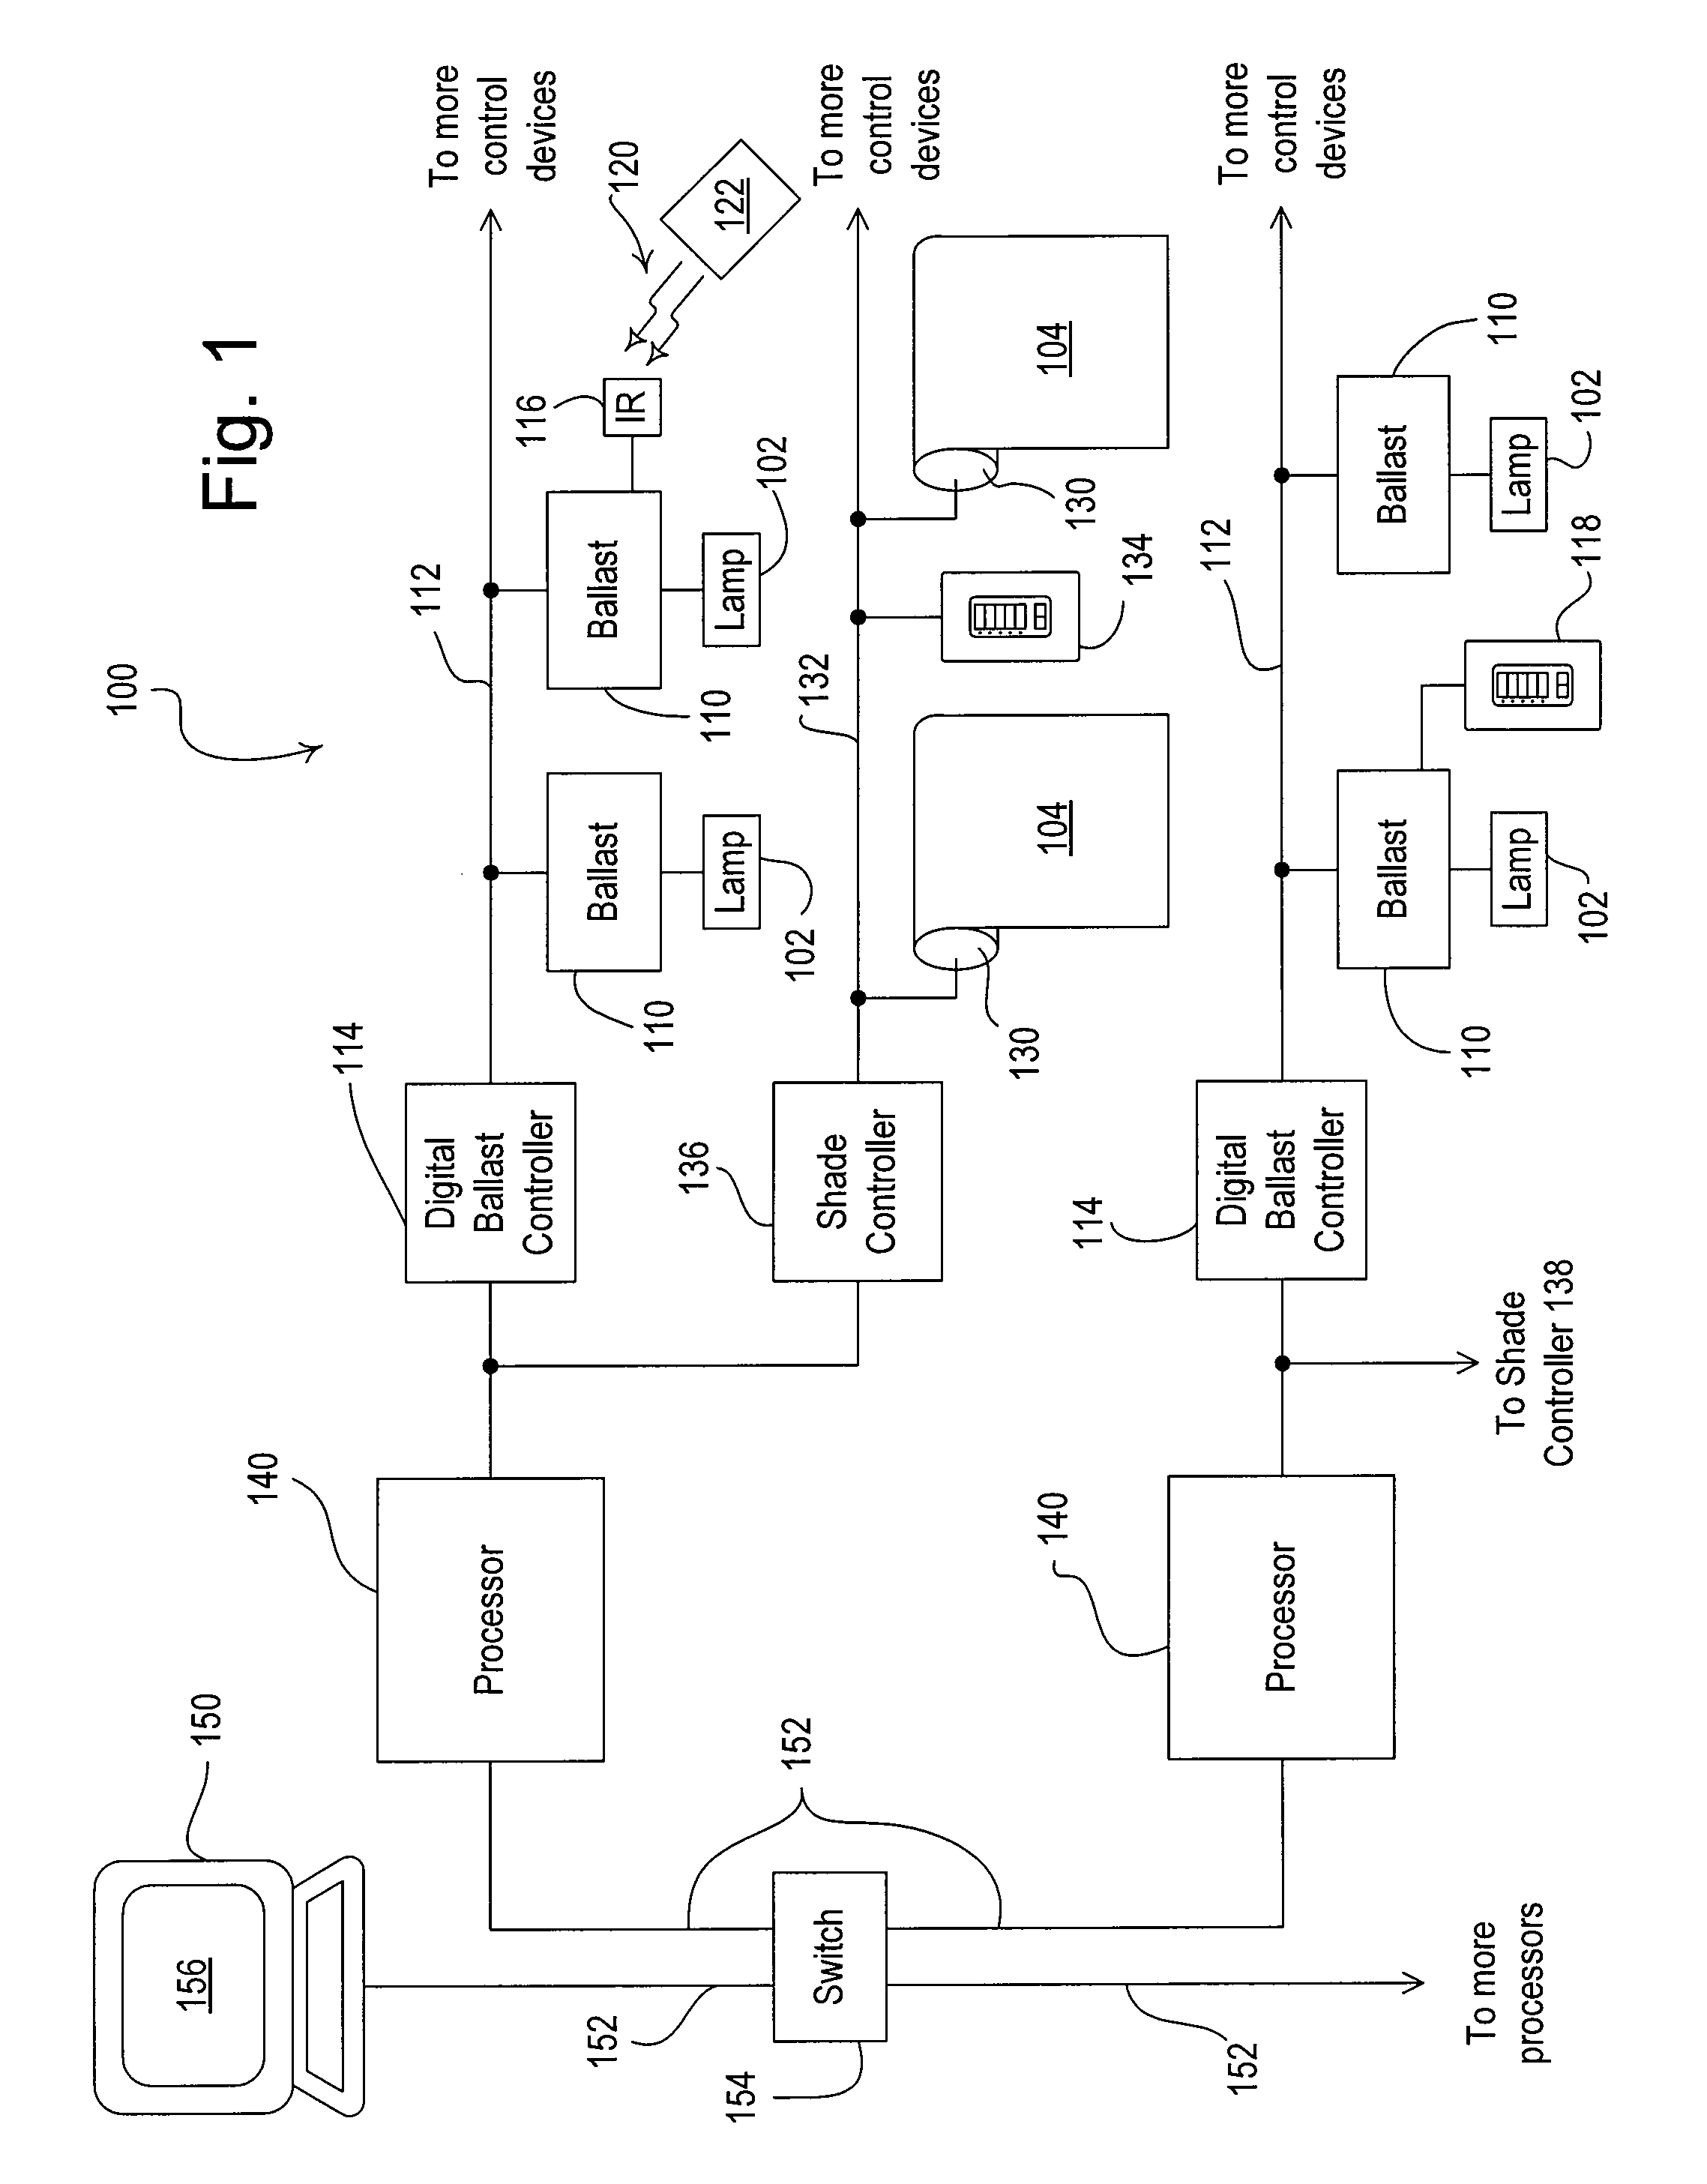 System and method for graphically displaying energy consumption and savings